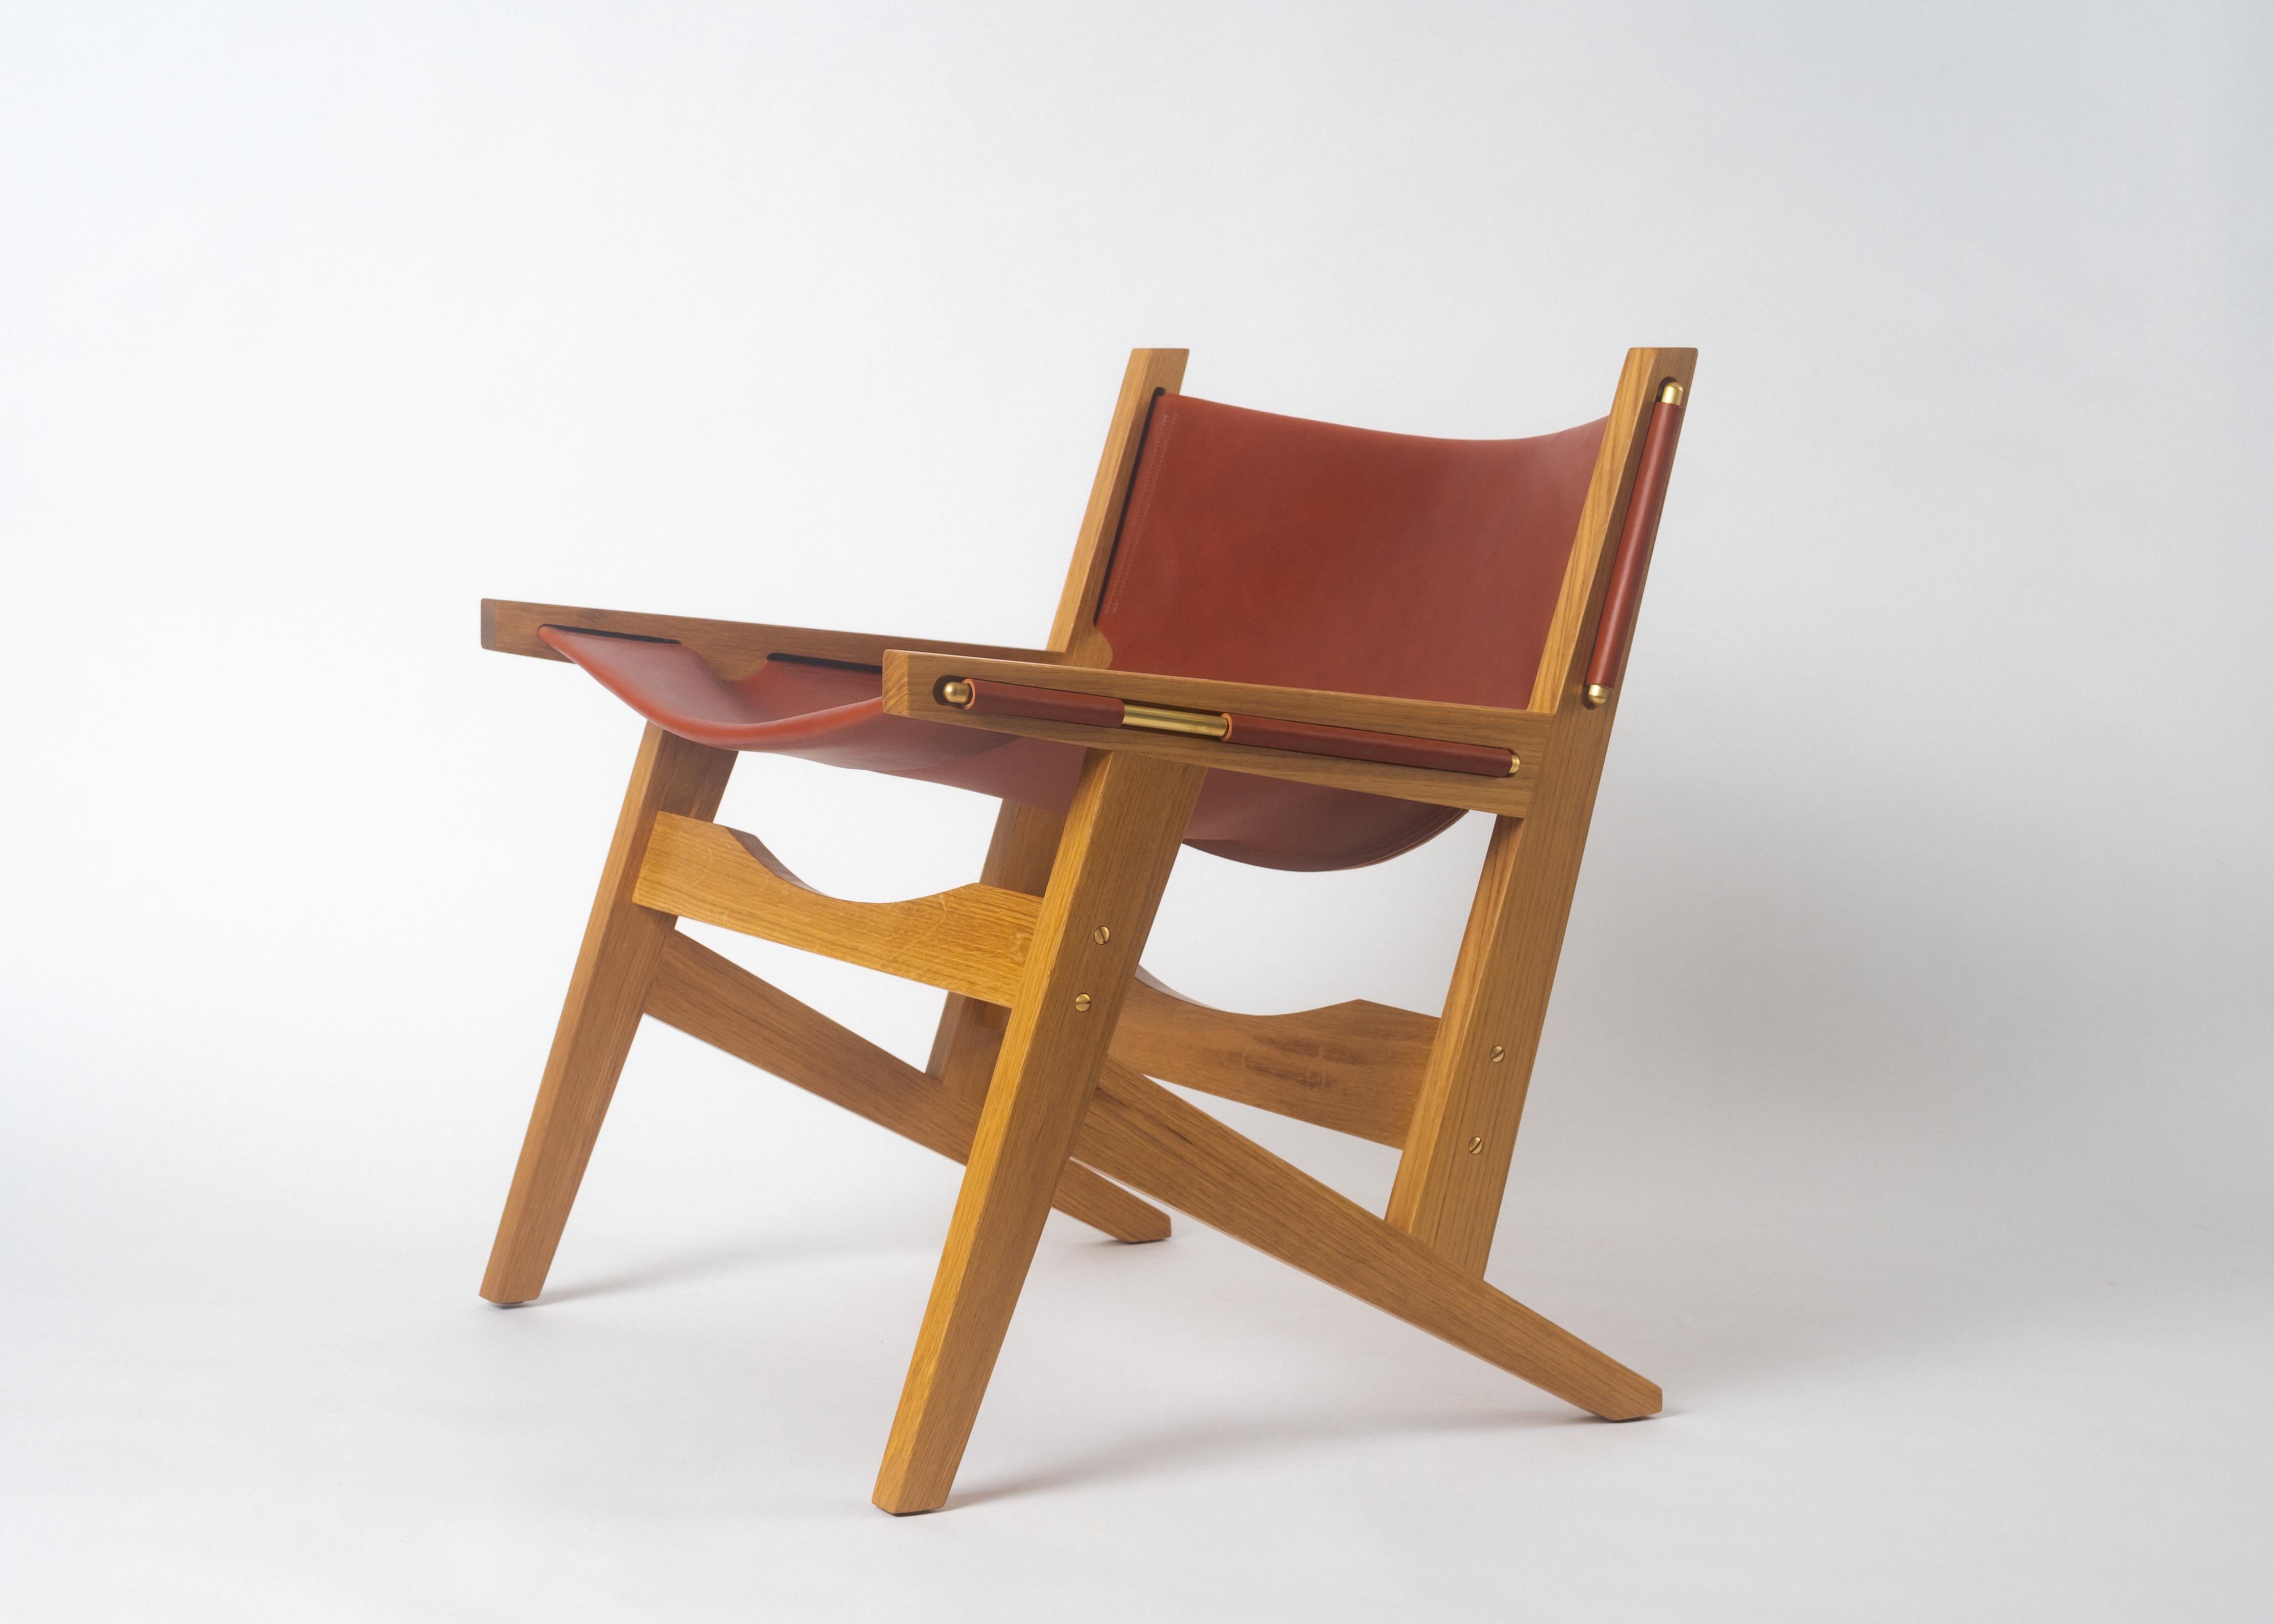 Phloem Studio Peninsula chair is a modern contemporary handcrafted leather sling lounge chair. The hand crafted solid white oak frame holds the heavy weight bridle leather sling in place with solid shaped exposed brass or blackened brass rods.